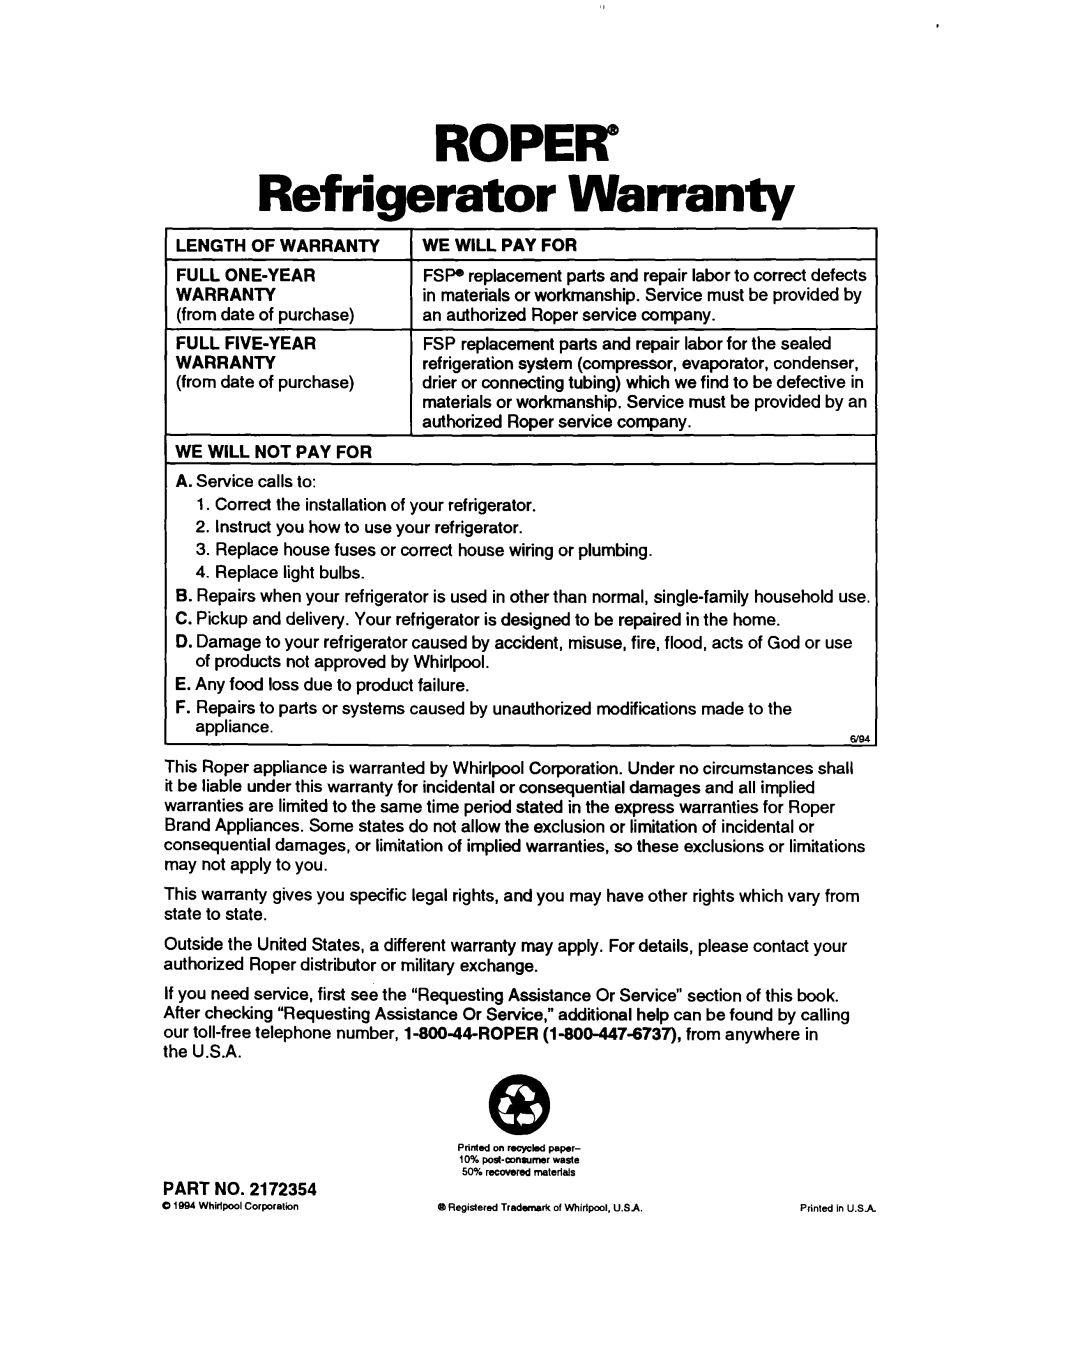 Whirlpool RTl4VK, RT14ZK ROPER” Refrigerator Warranty, Length Of Warranty, We Will Pay For, Full One-Year, Full Five-Year 